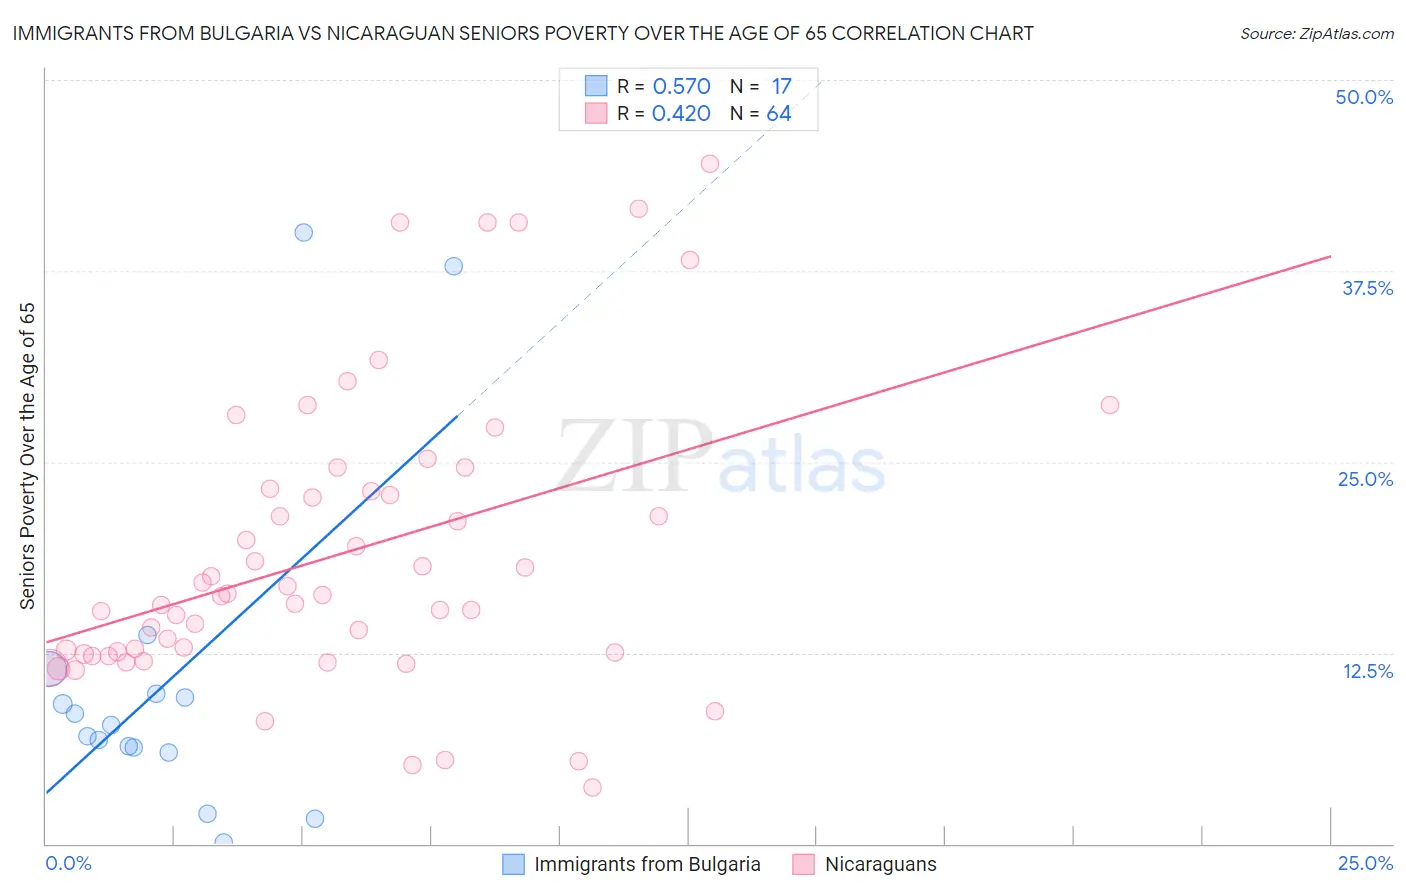 Immigrants from Bulgaria vs Nicaraguan Seniors Poverty Over the Age of 65